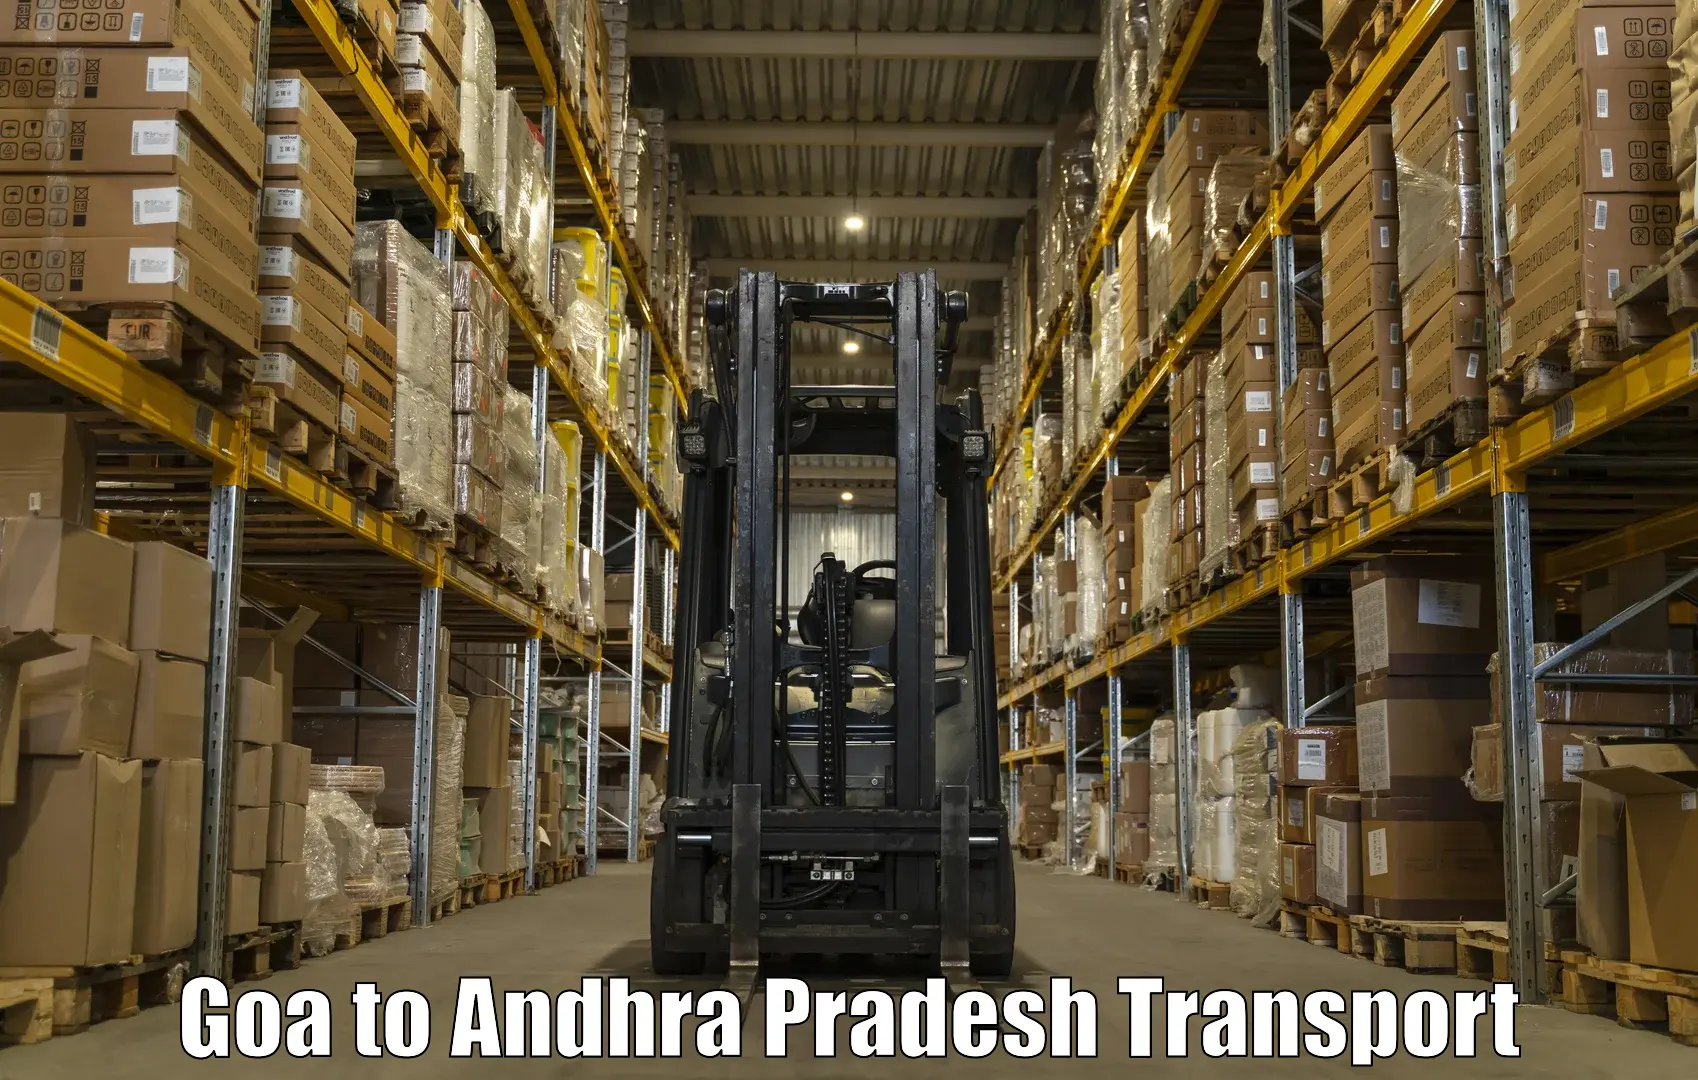 Daily parcel service transport Goa to Podalakur